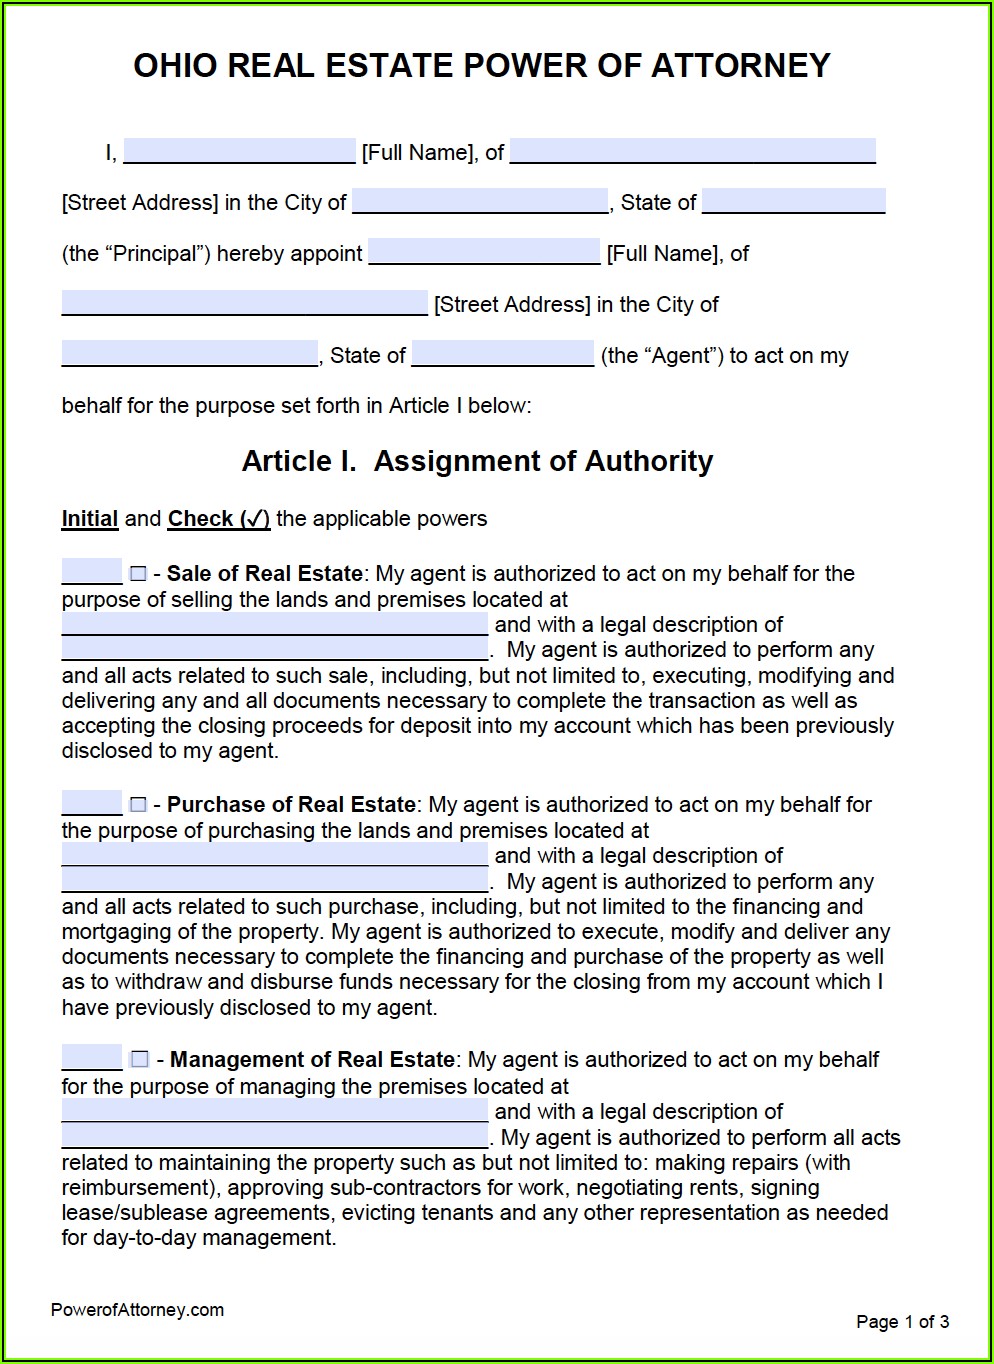 Ohio Has An Approved Financial Power Of Attorney Form